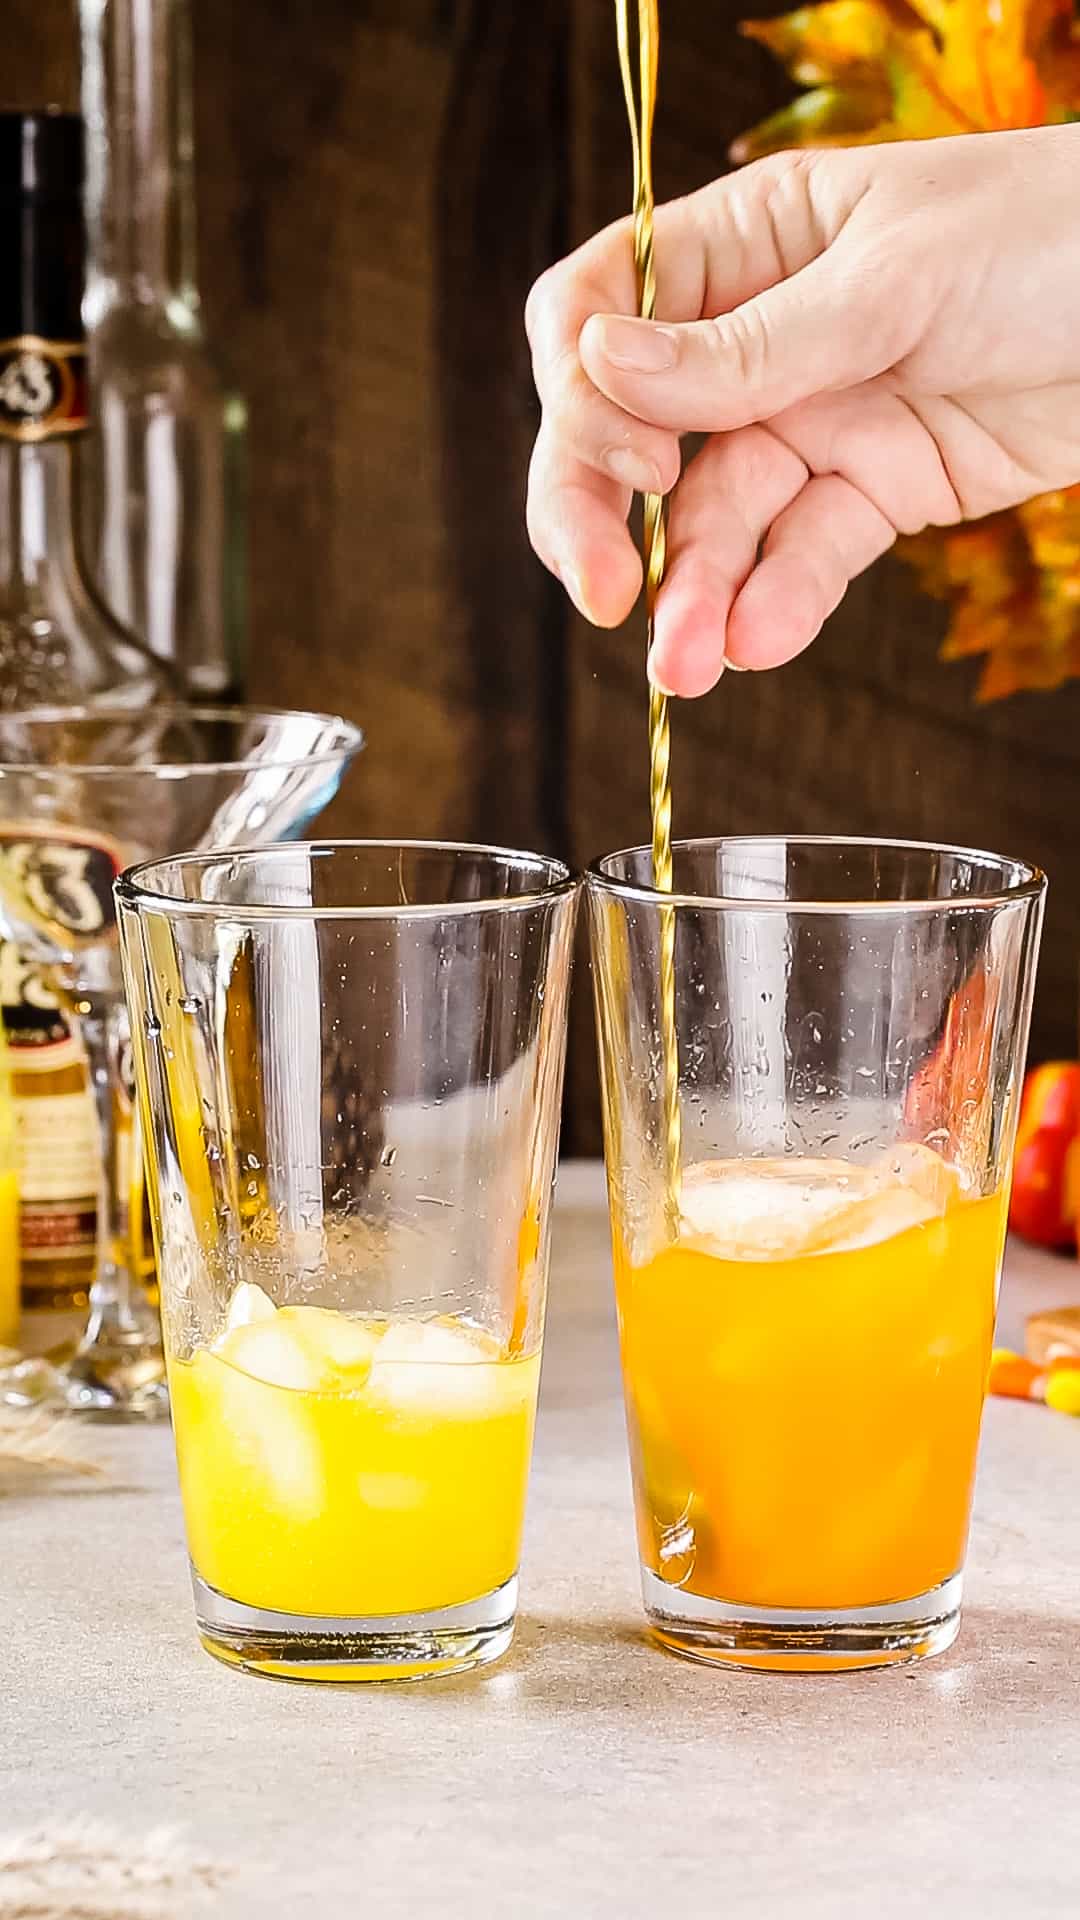 Two glass cocktail shakers on a countertop, one with yellow liquid and ice, and one with orange liquid and ice. Hand is using a long bar spoon to stir the orange mixture.